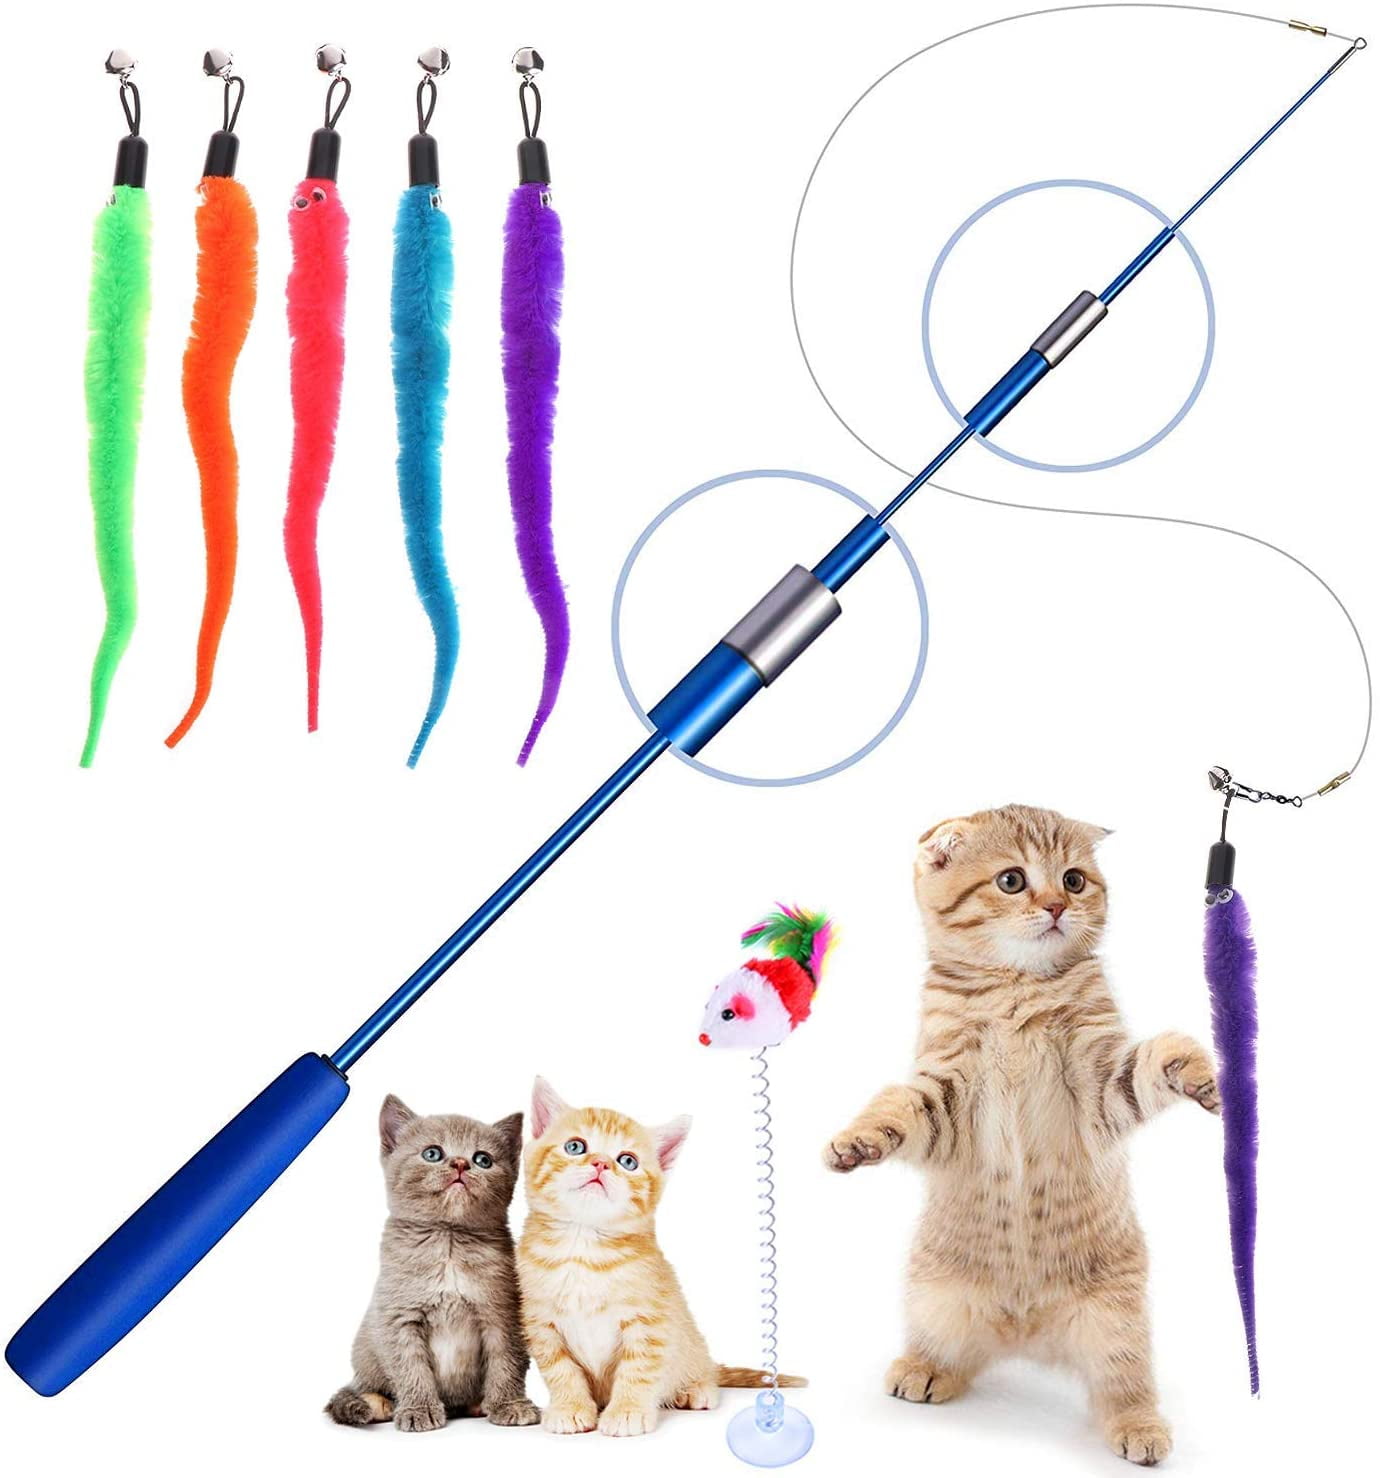 Beads Bells Kitten Wand Toys MAIYU Cat Feather Wand Toy 3 Pack Steel Wire Feather Interactive Cat Stick Training Pet Teaser with 3 PCS Worm Toy Replacement Refill for Free 